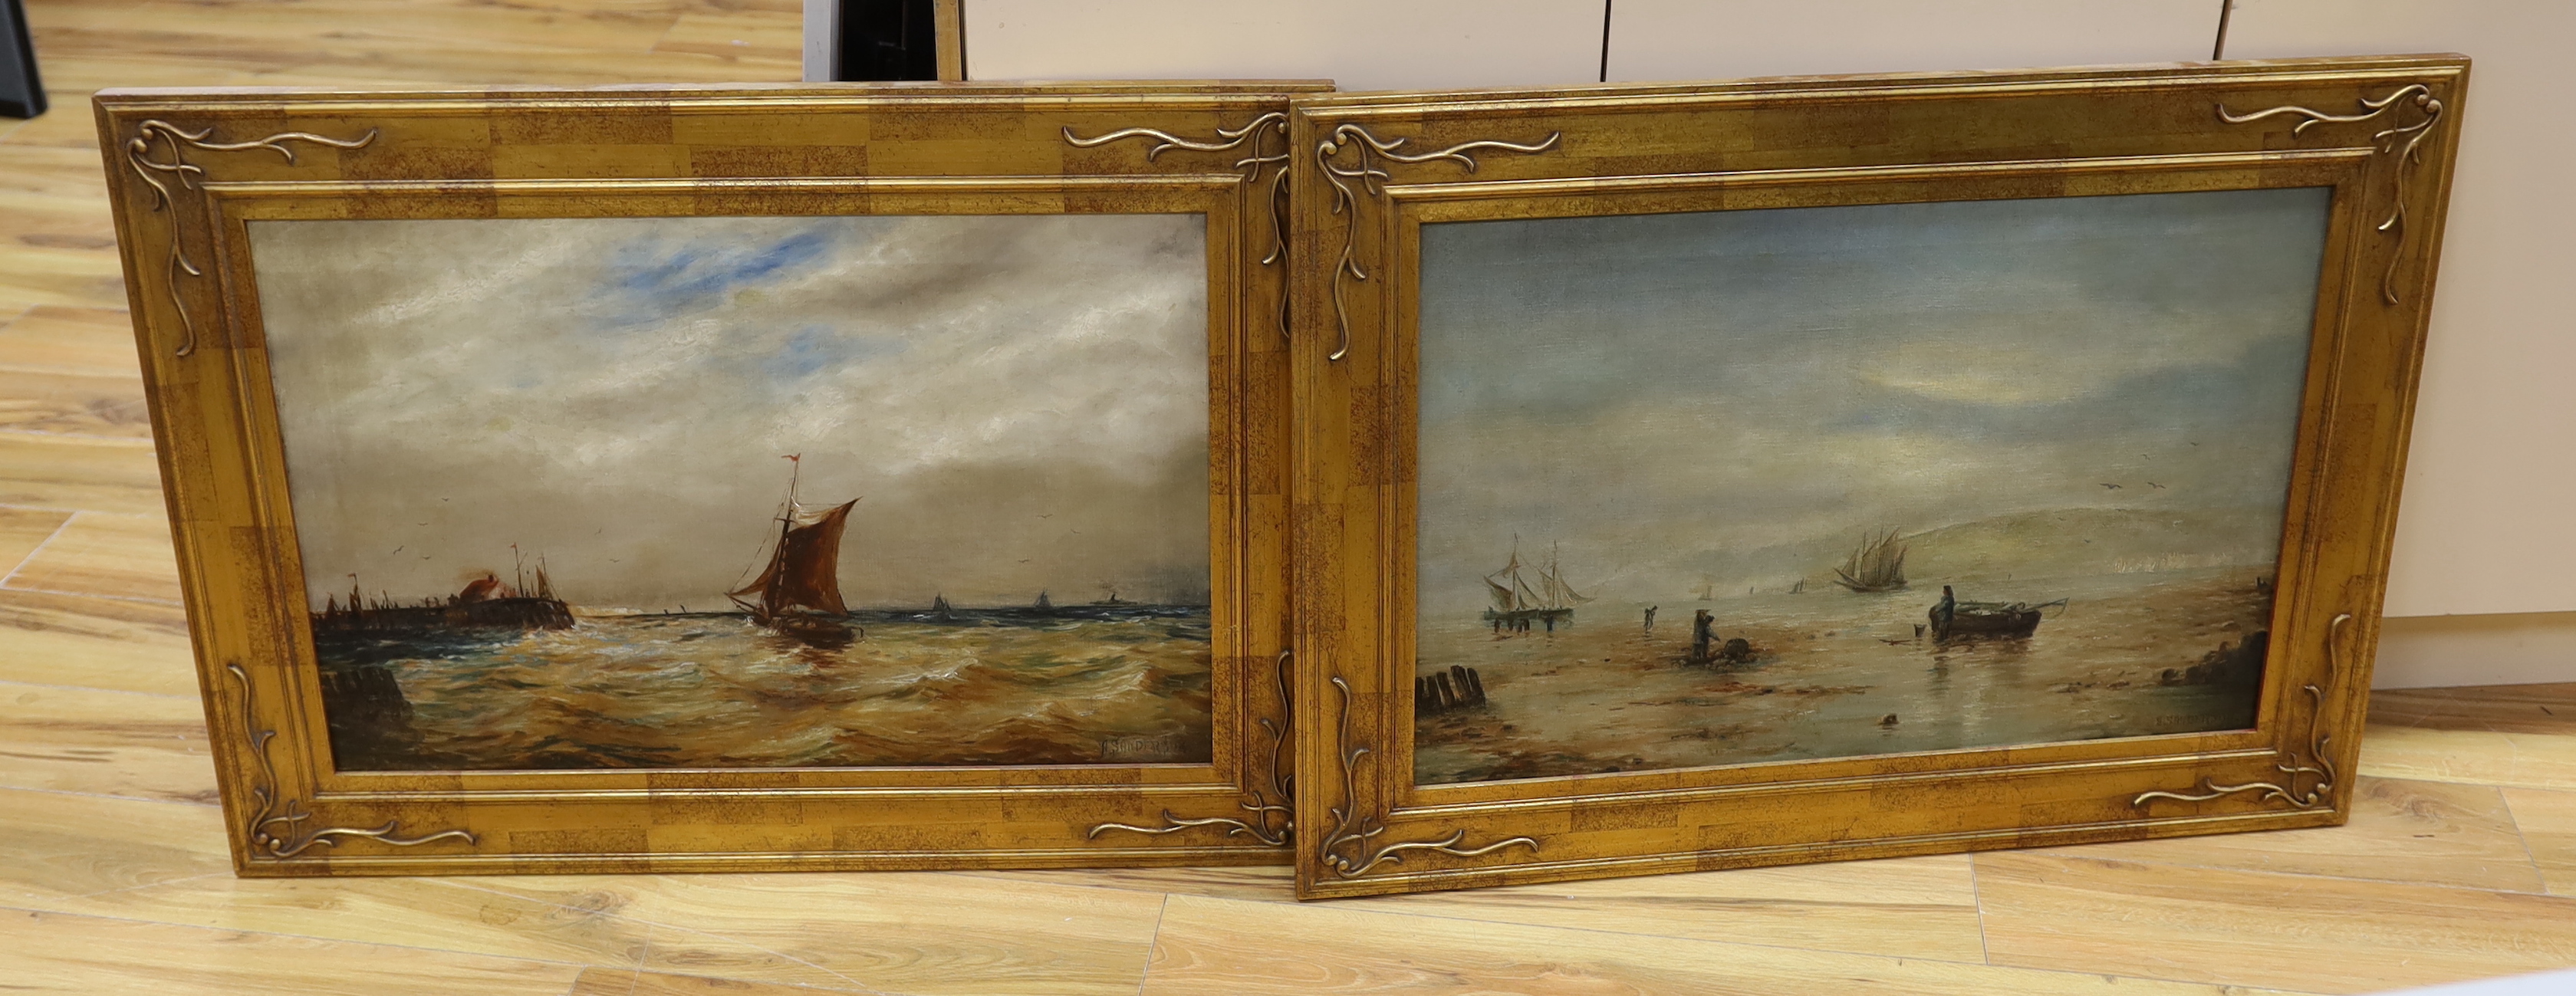 A. Sanderson, pair of oils on canvas, Moored fishing boats and Boats at sea, signed, 75 x 50cm